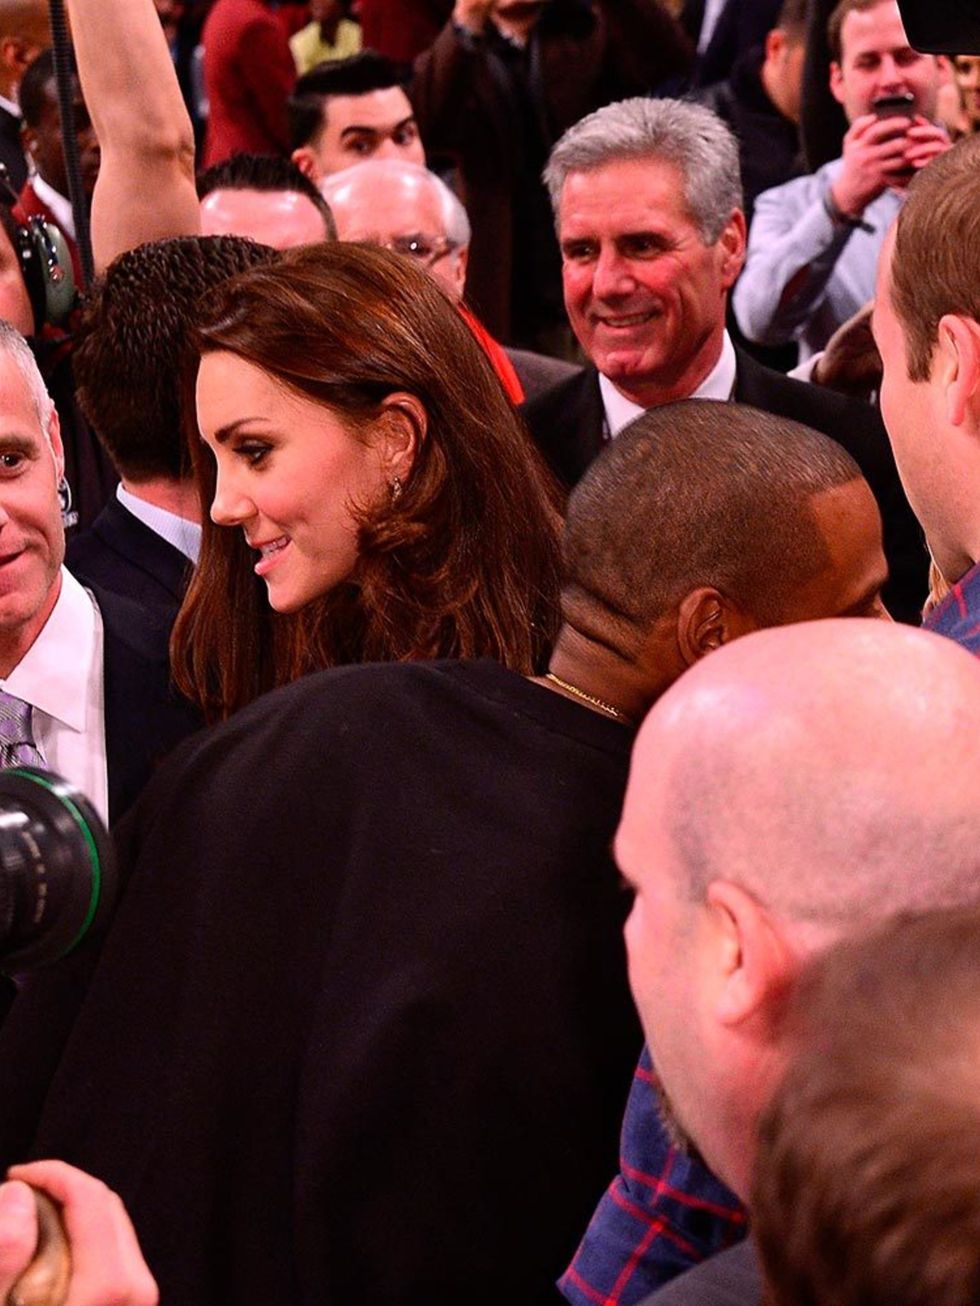 <p>4. When pop royalty Beyoncé and Jay Z went to say hi at half time during the game (#casual).</p>

<p>Kate Middleton, Prince William, Jay Z and Beyonce at the Cleveland Cavaliers vs. Brooklyn Nets game in New York, December 2014.</p>